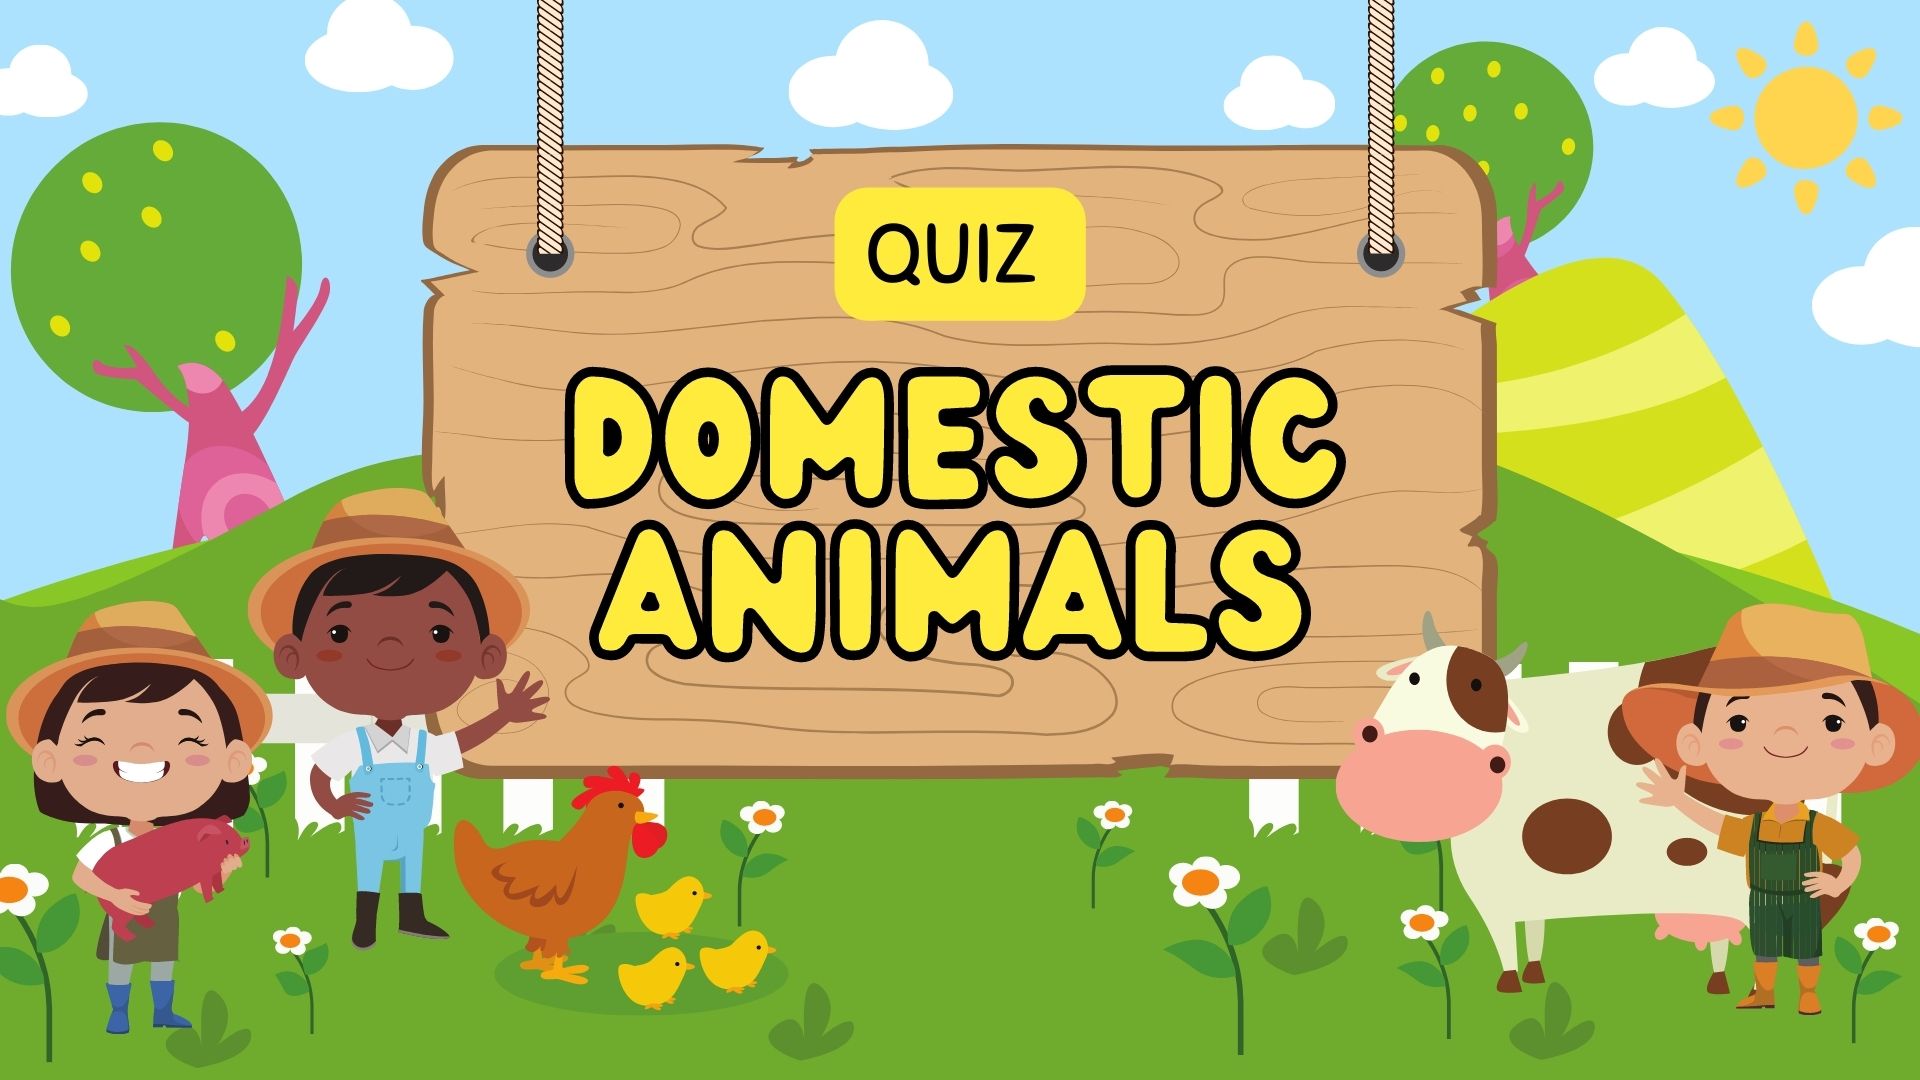 gross domestic product Flashcards - Quizizz